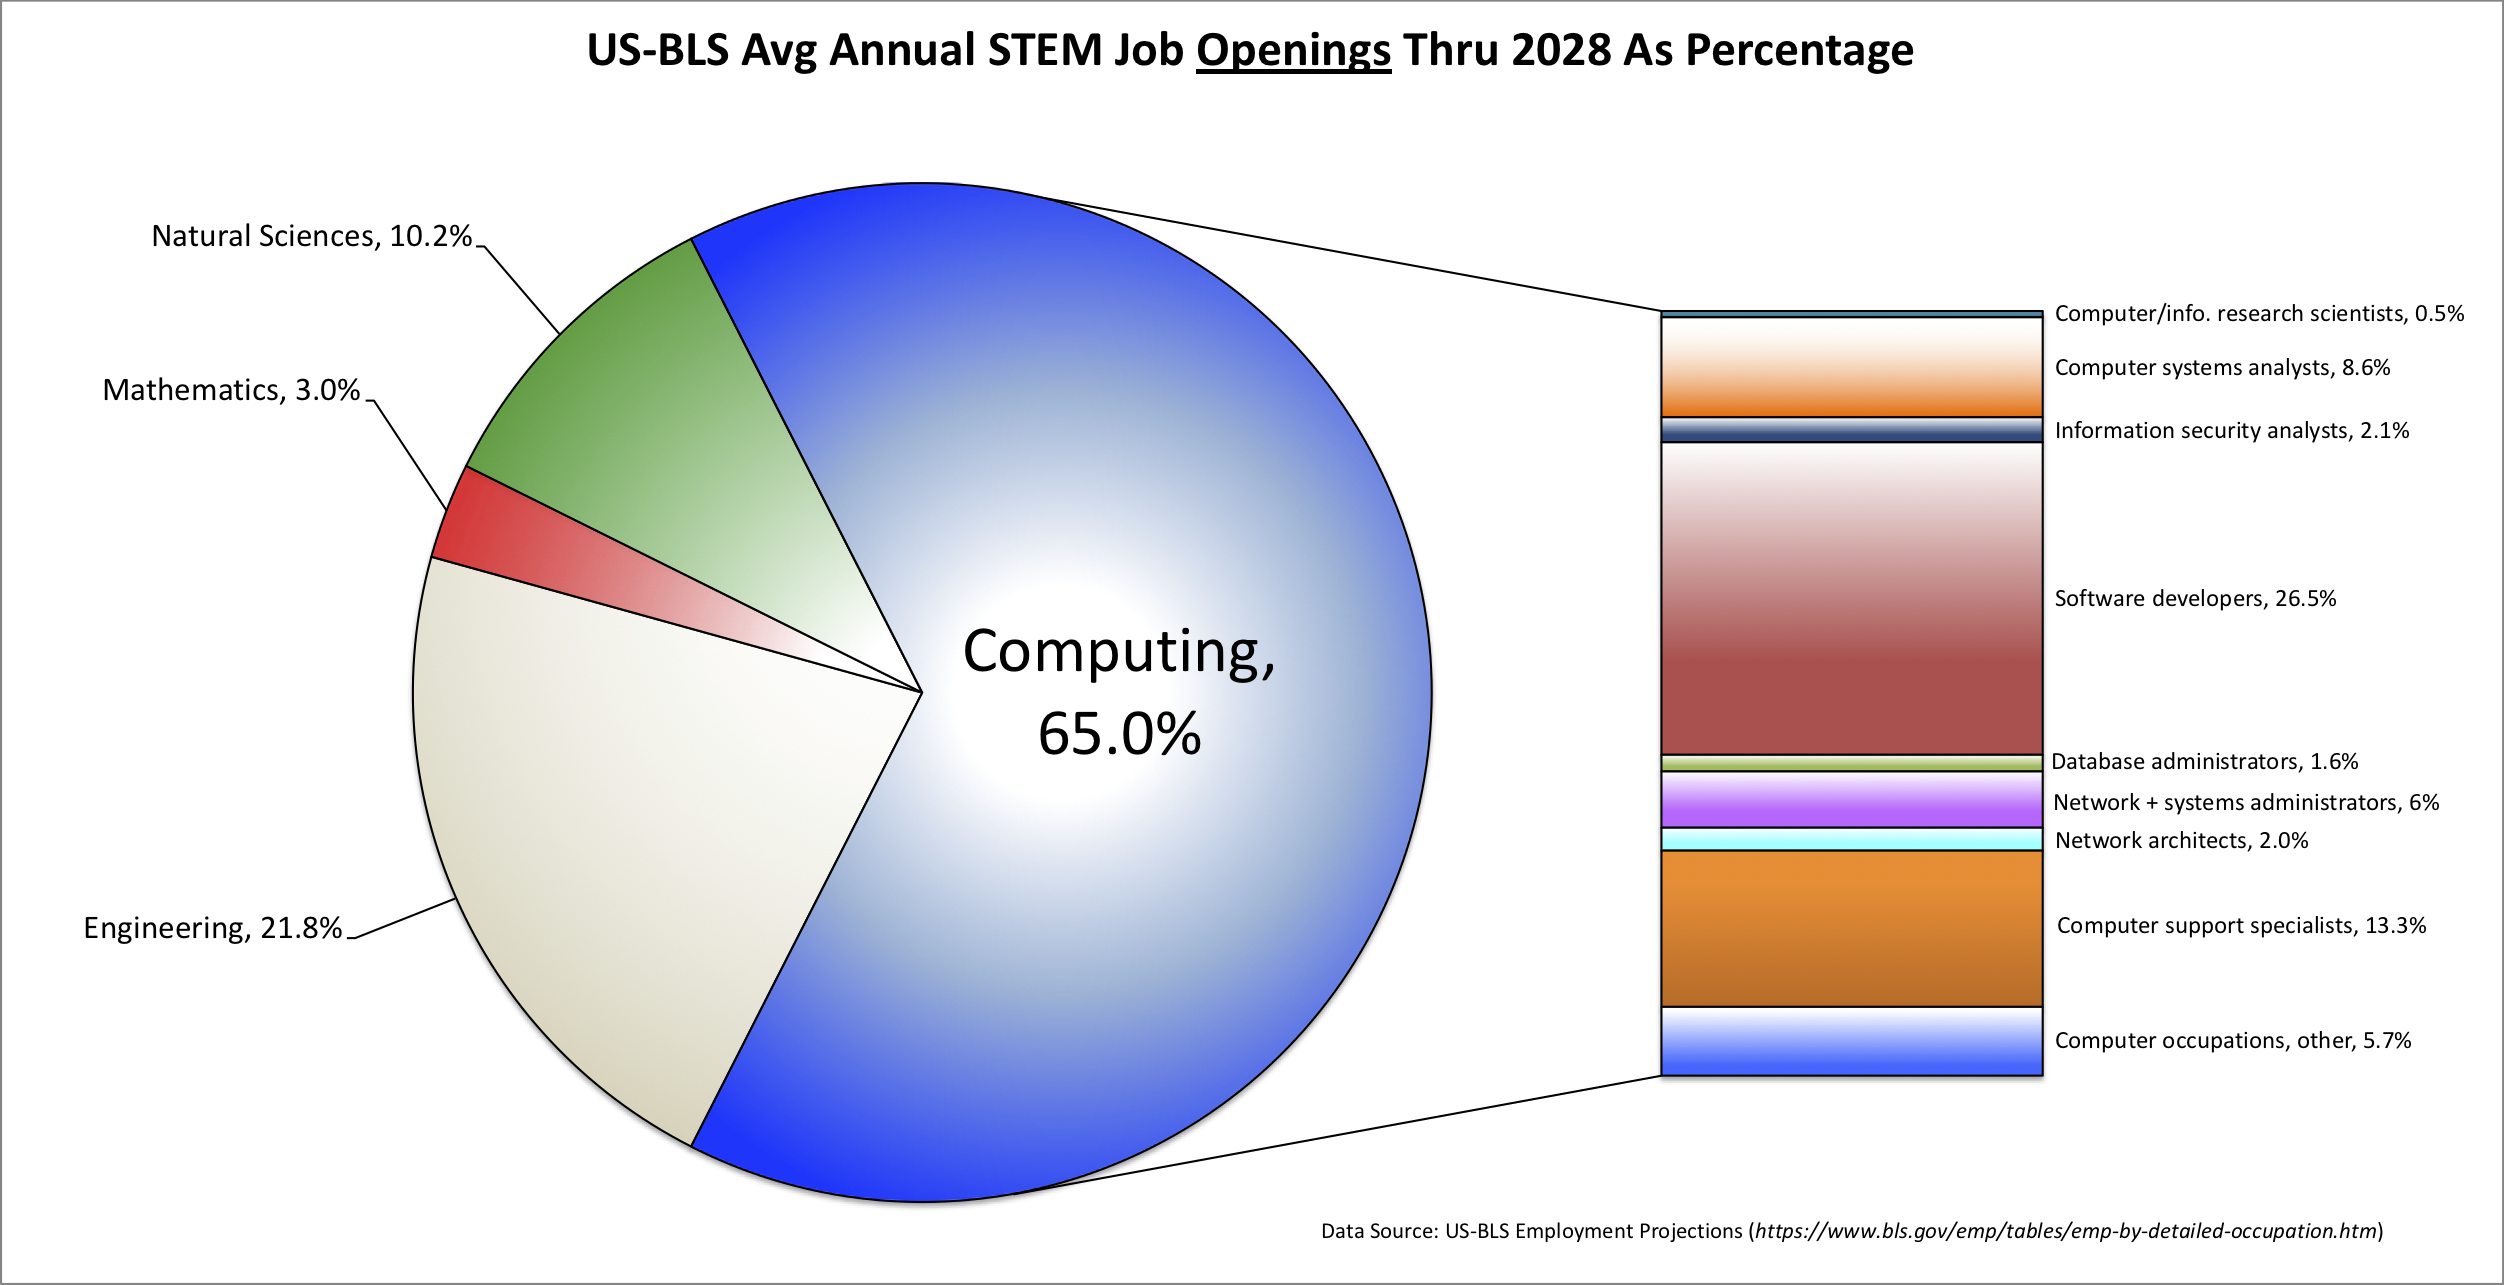 The U.S. Bureau of Labor predicts that between now and 2028,
            63% of all STEM jobs will be computing jobs